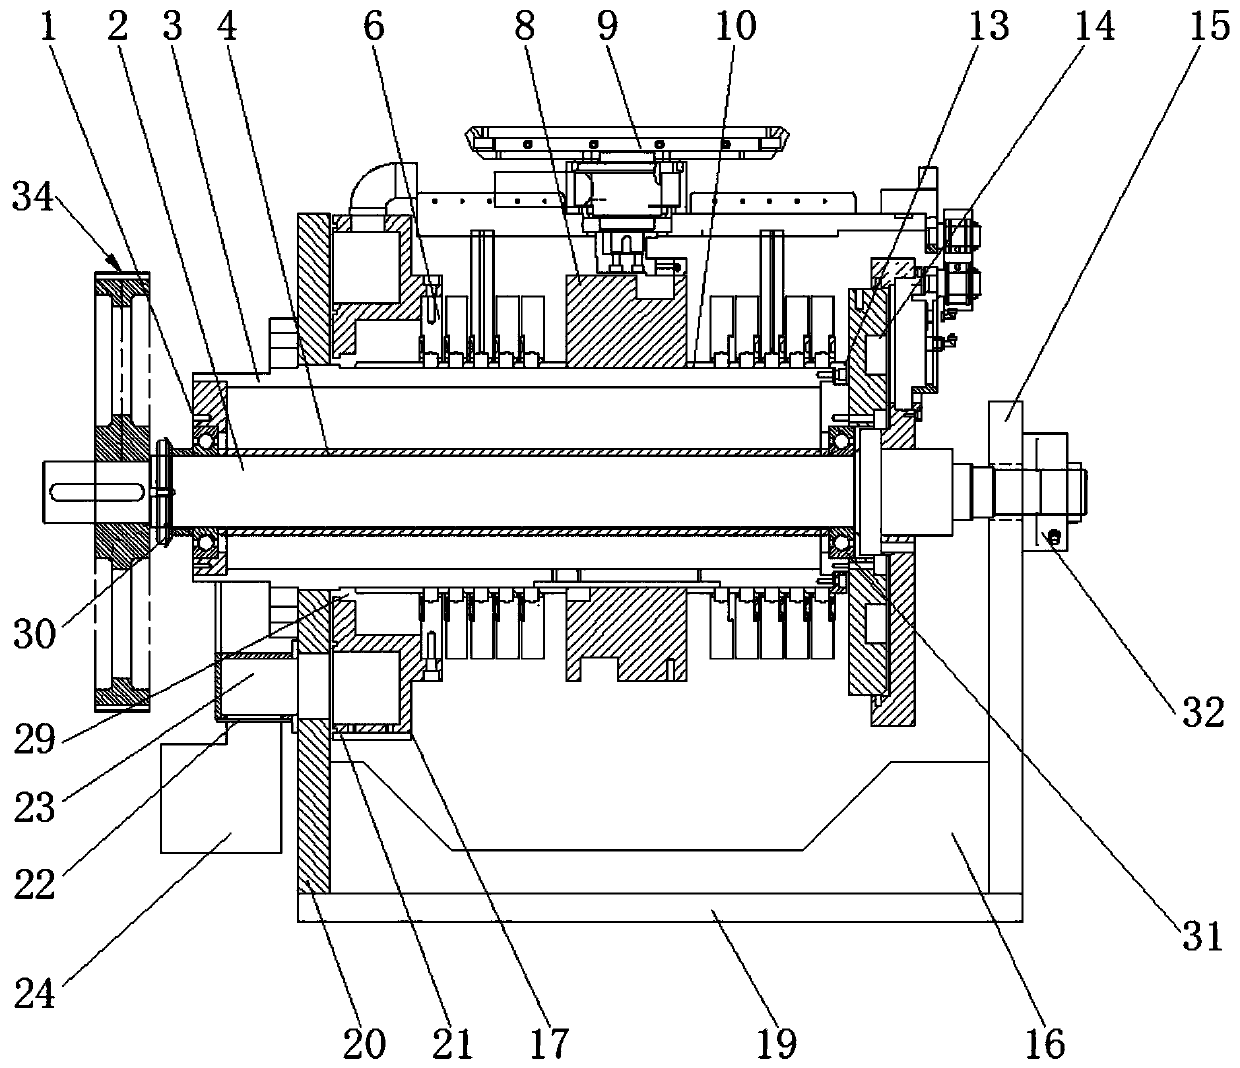 Five-axis linkage transverse-changing device for diaper production